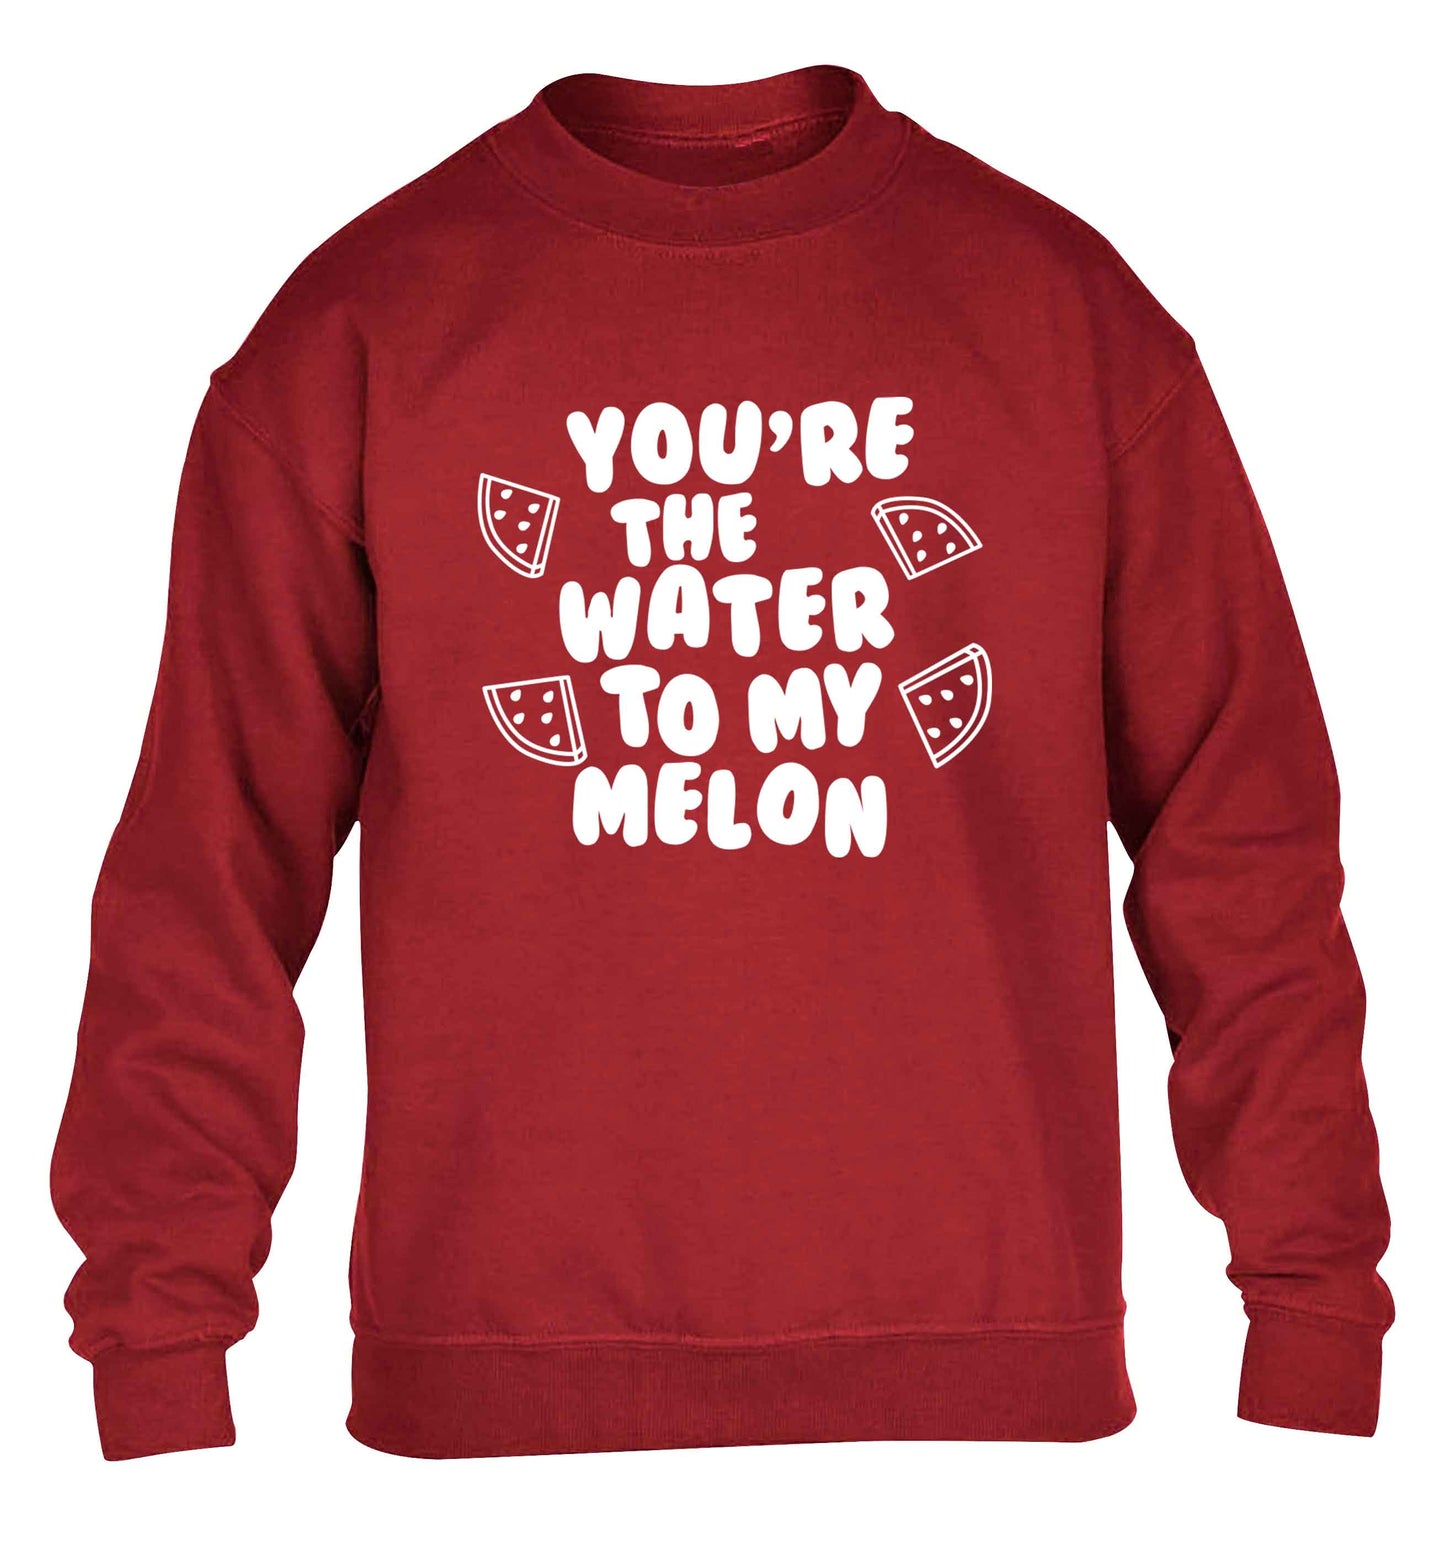 You're the water to my melon children's grey sweater 12-13 Years